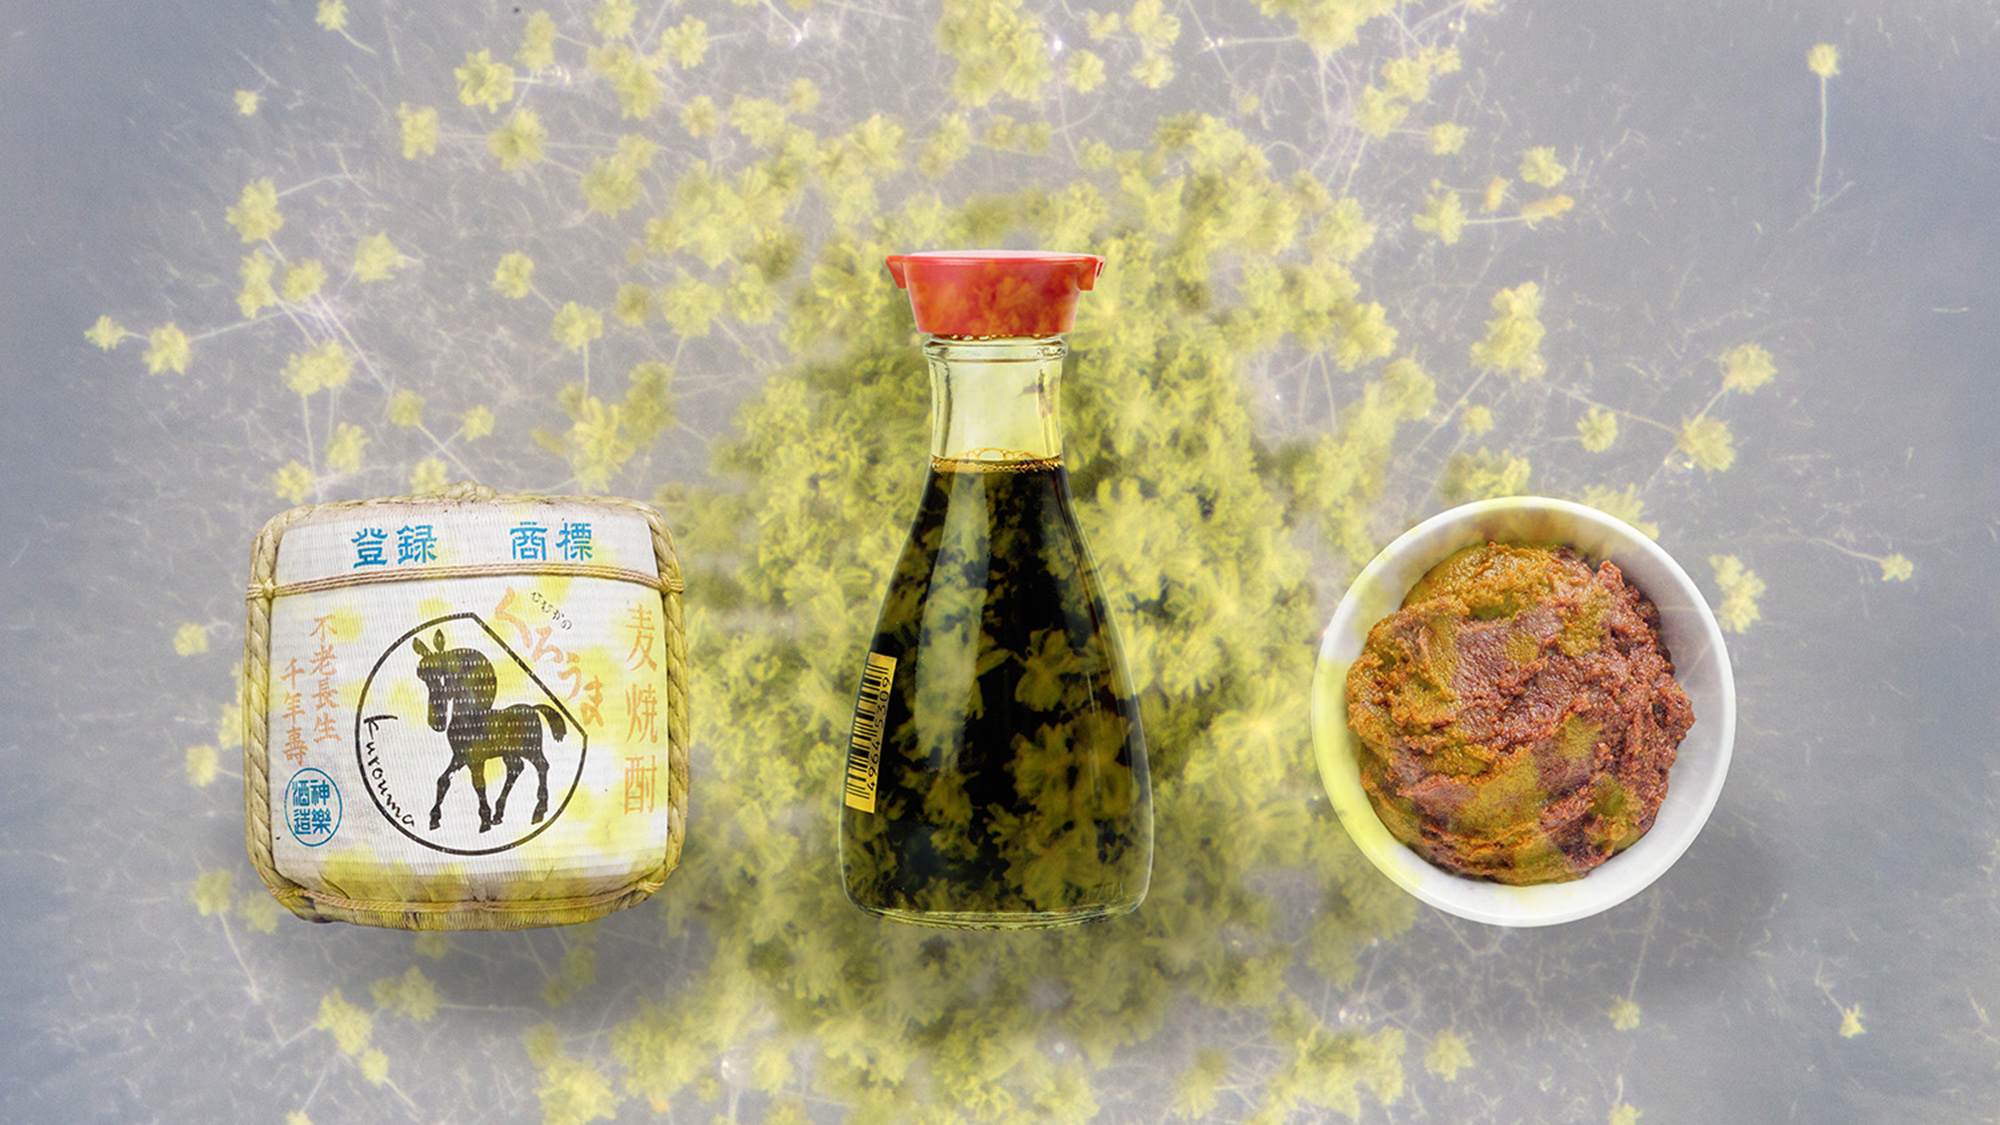 From toxic fungus to soy sauce superstar